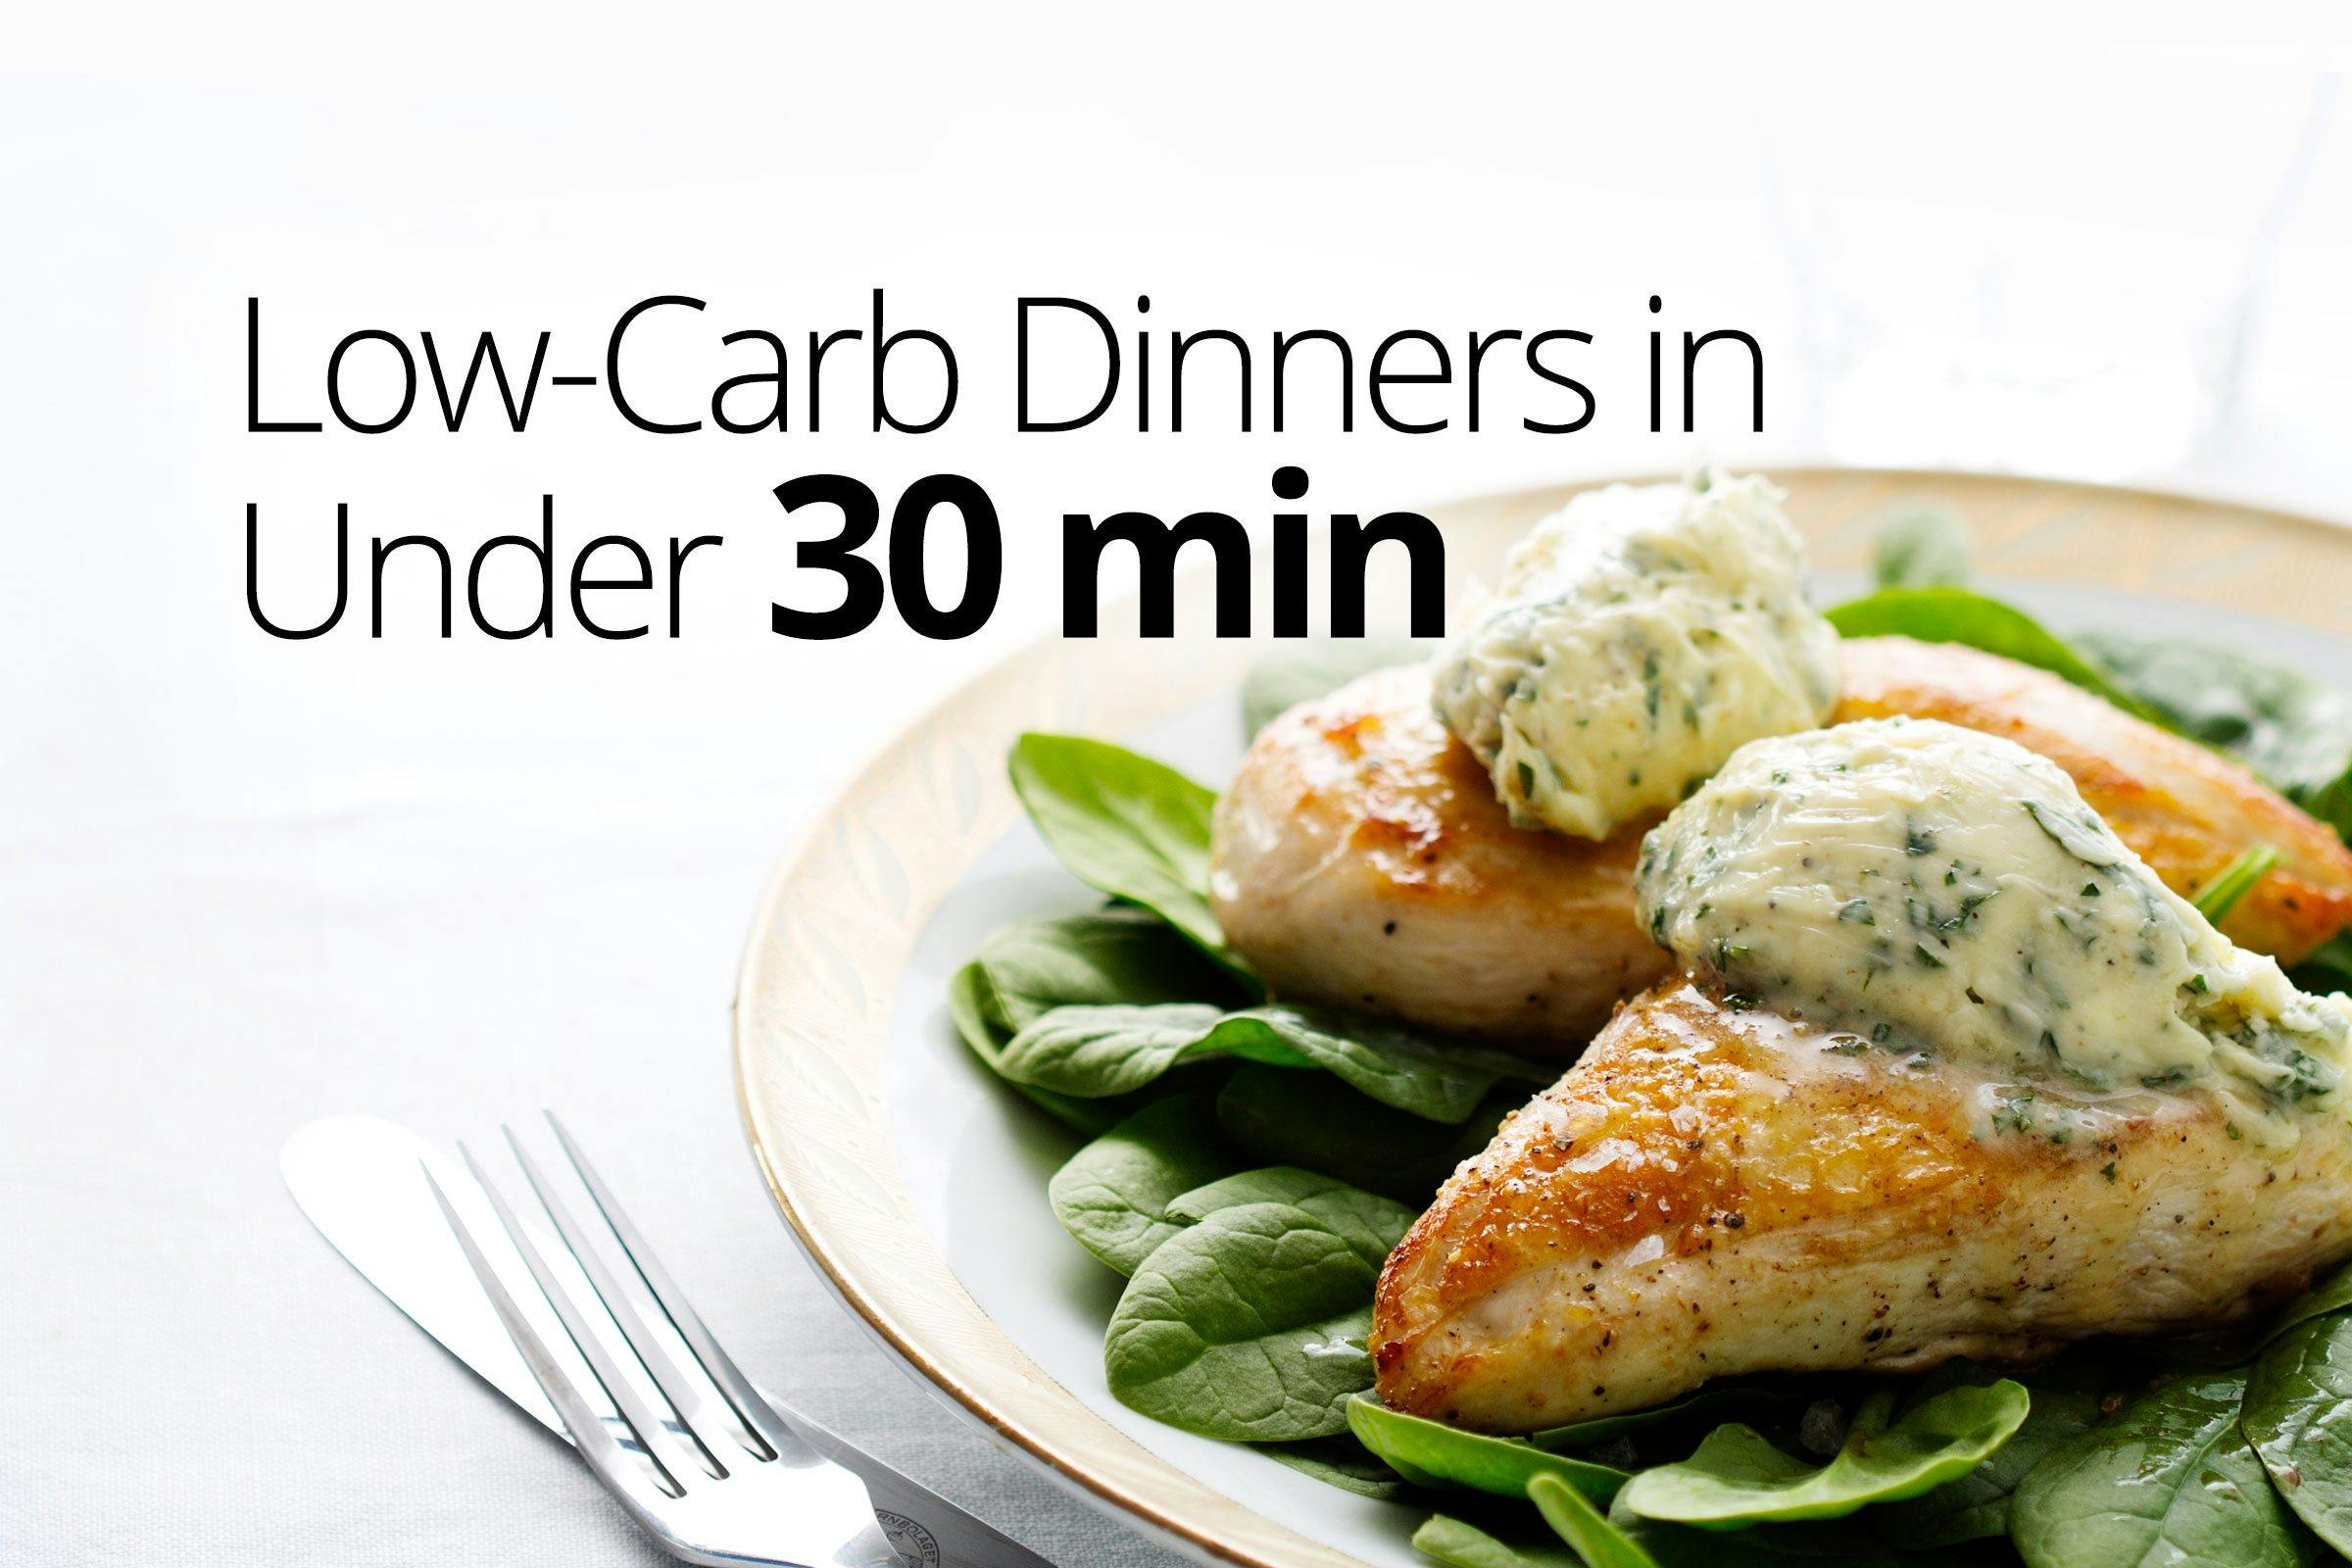 Low-carb dinners in under 30 minutes - Diet Doctor